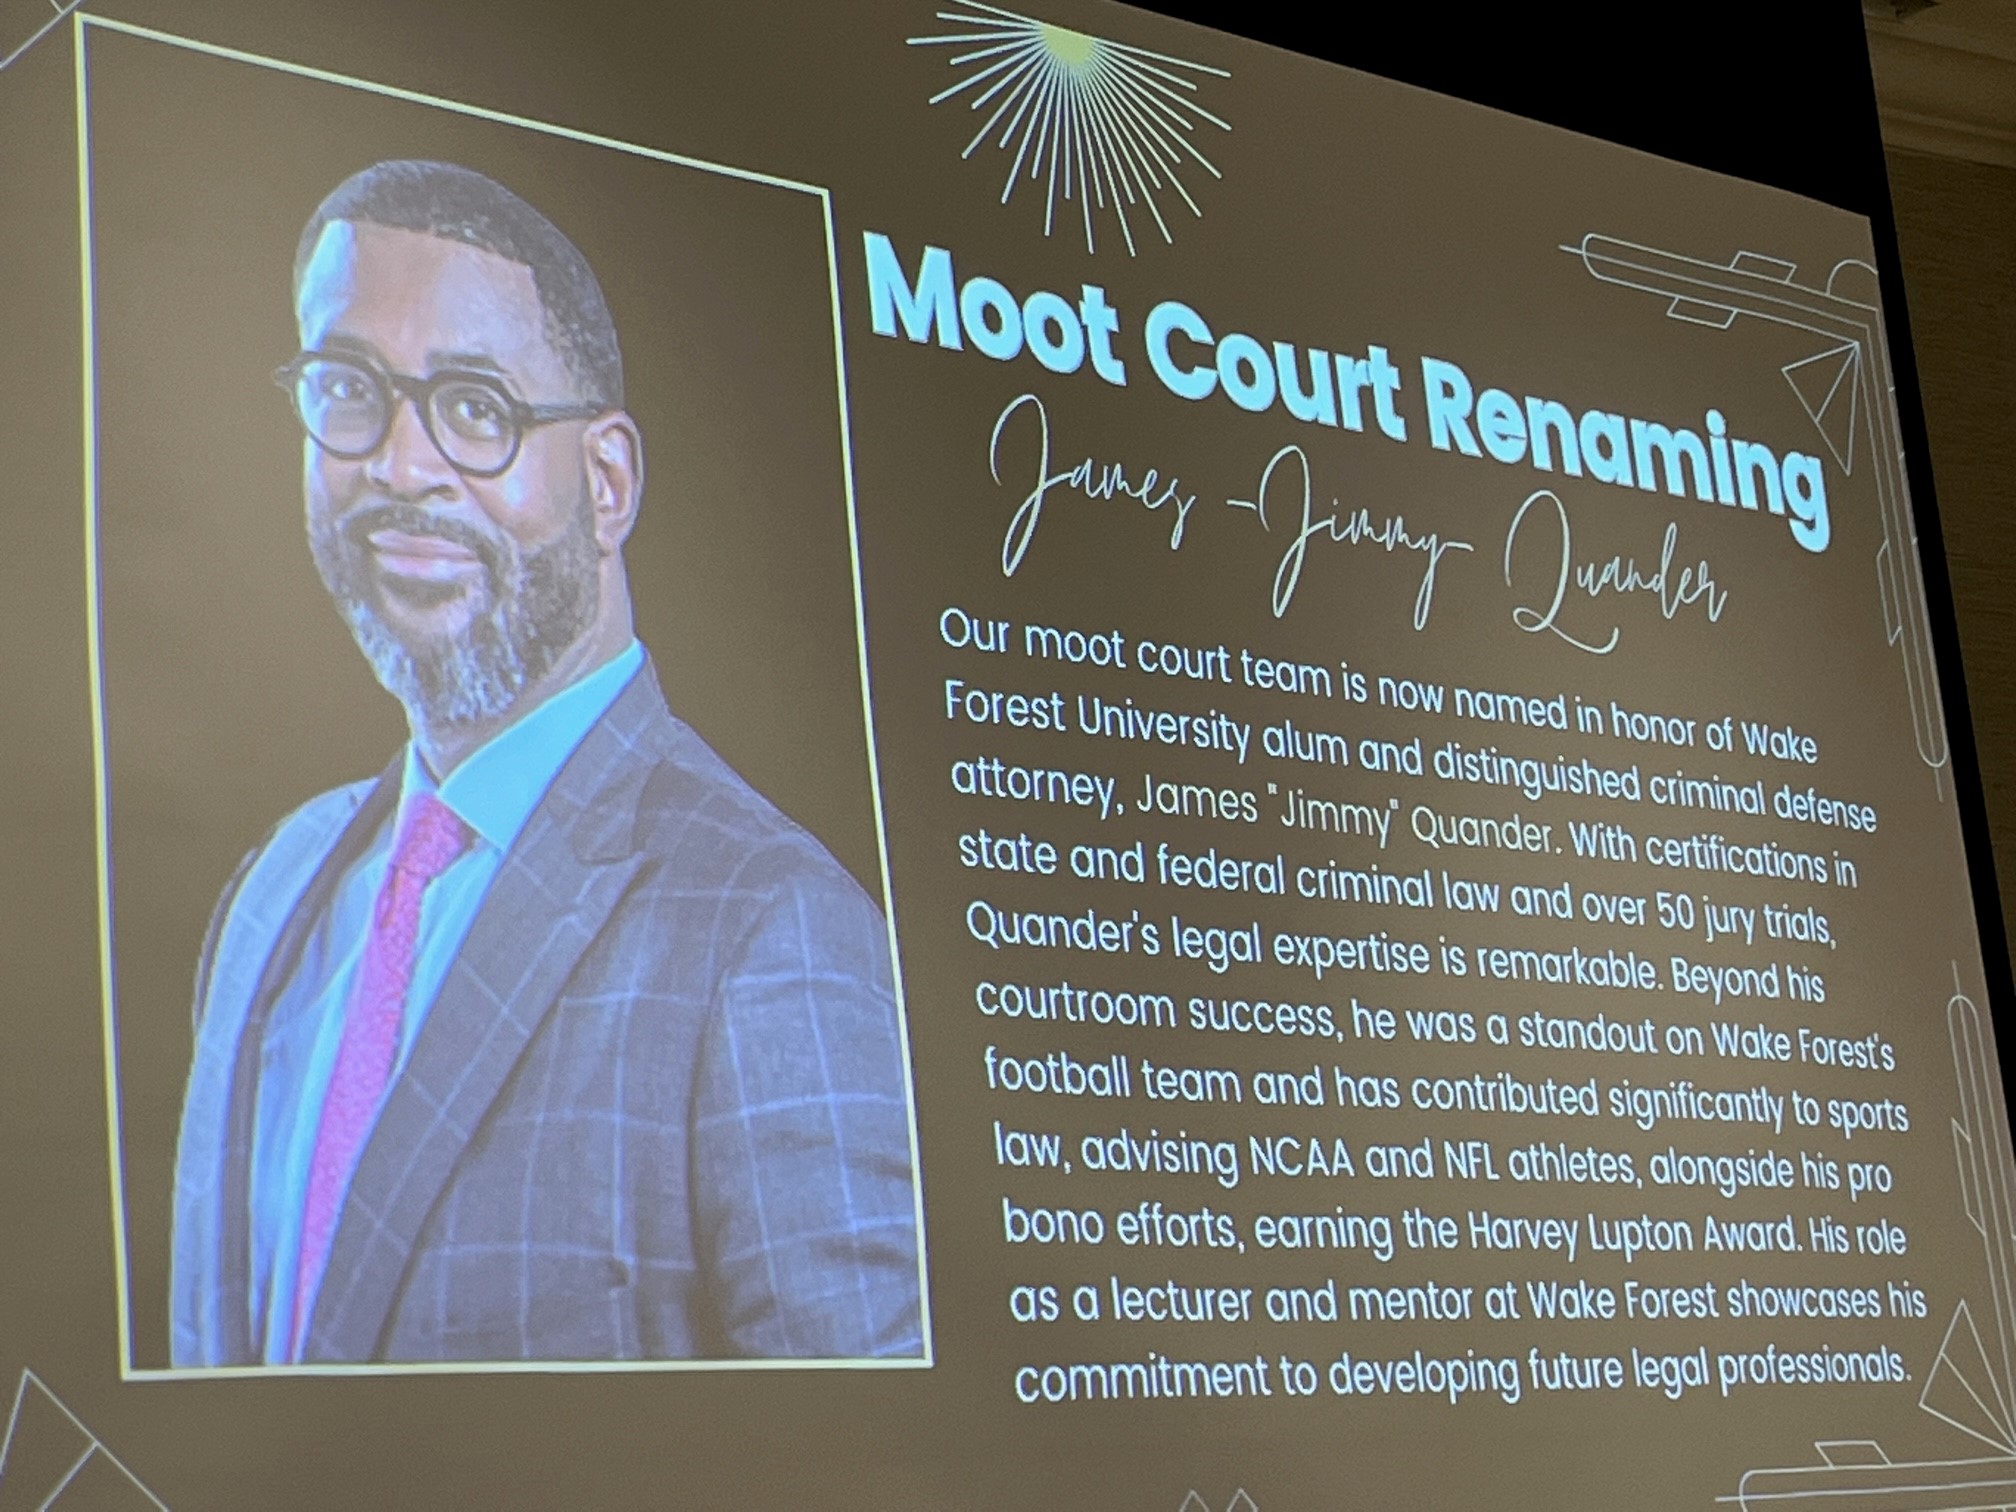 A slide with Jimmy Quander's photo reads Moot Court Renaming: James "Jimmy" Quander